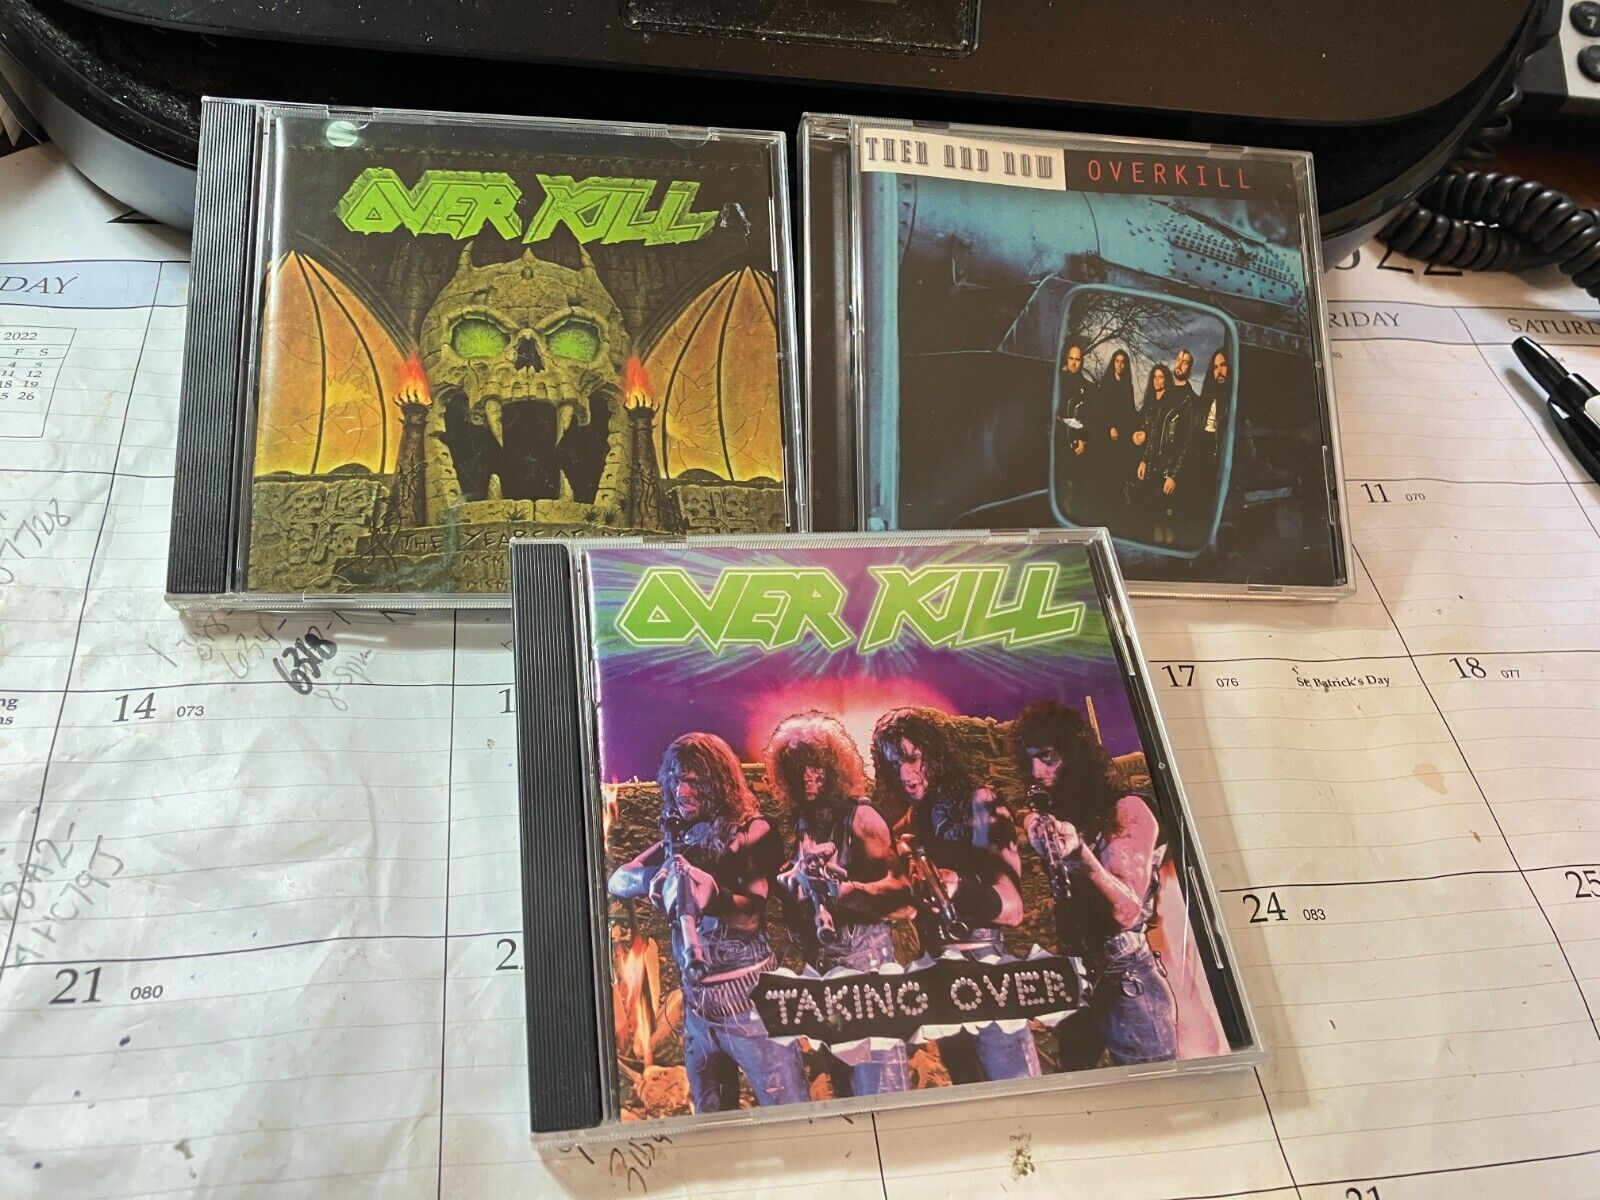 OVERKILL 3 CD LOT: TAKING OVER, THEN AND NOW, THE YEARS OF DECAY